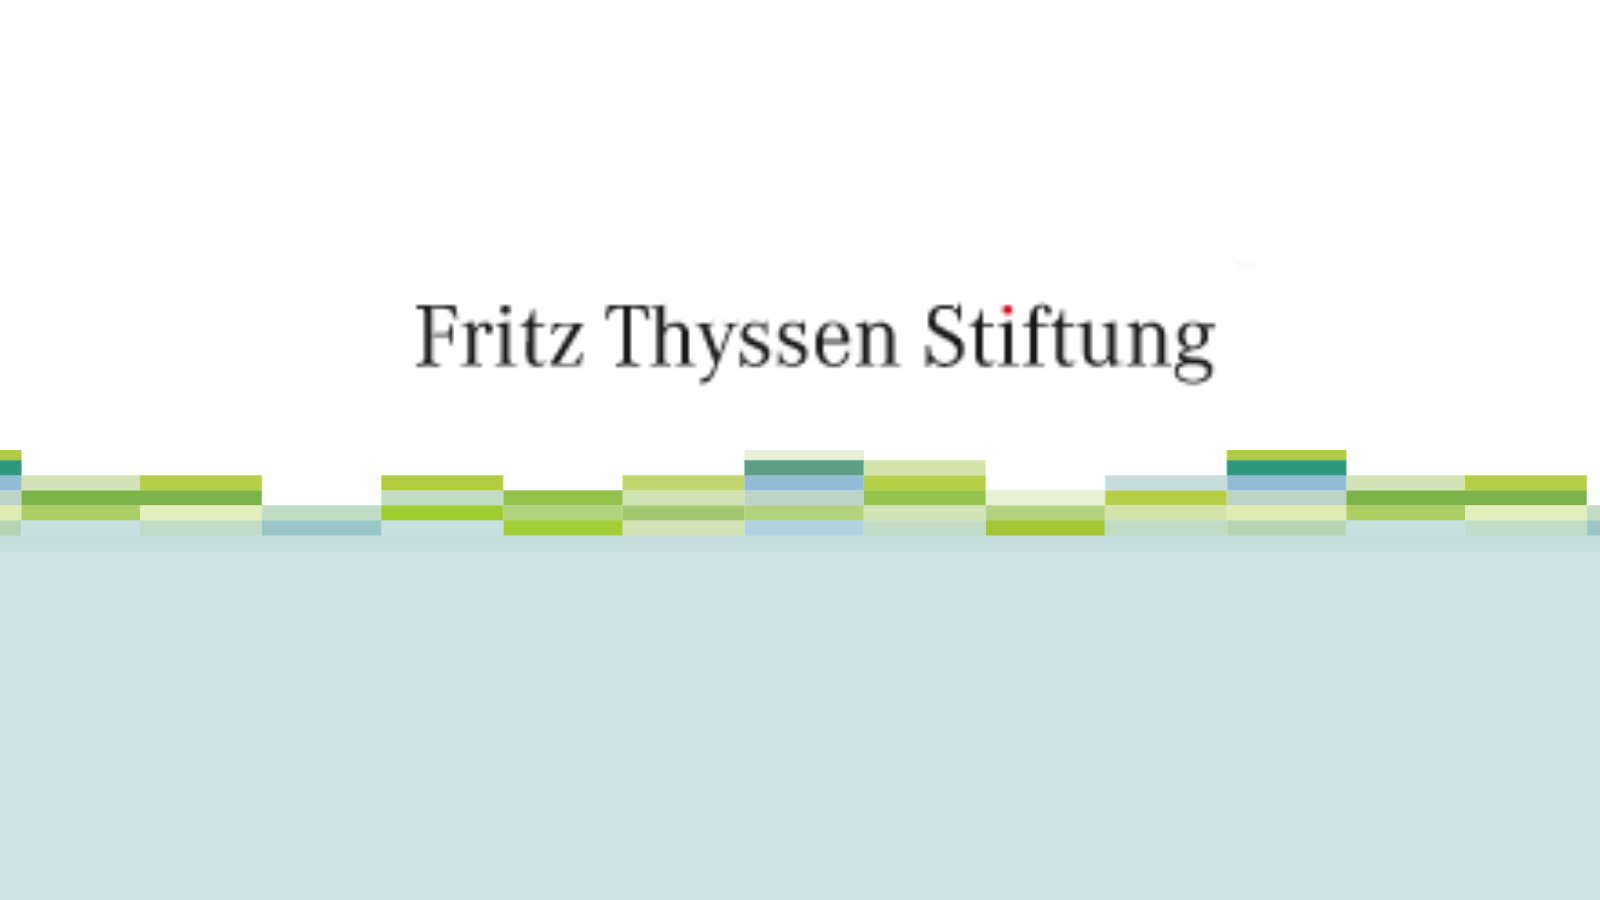 Fritz Thyssen Stiftung with colored rectangles underneath